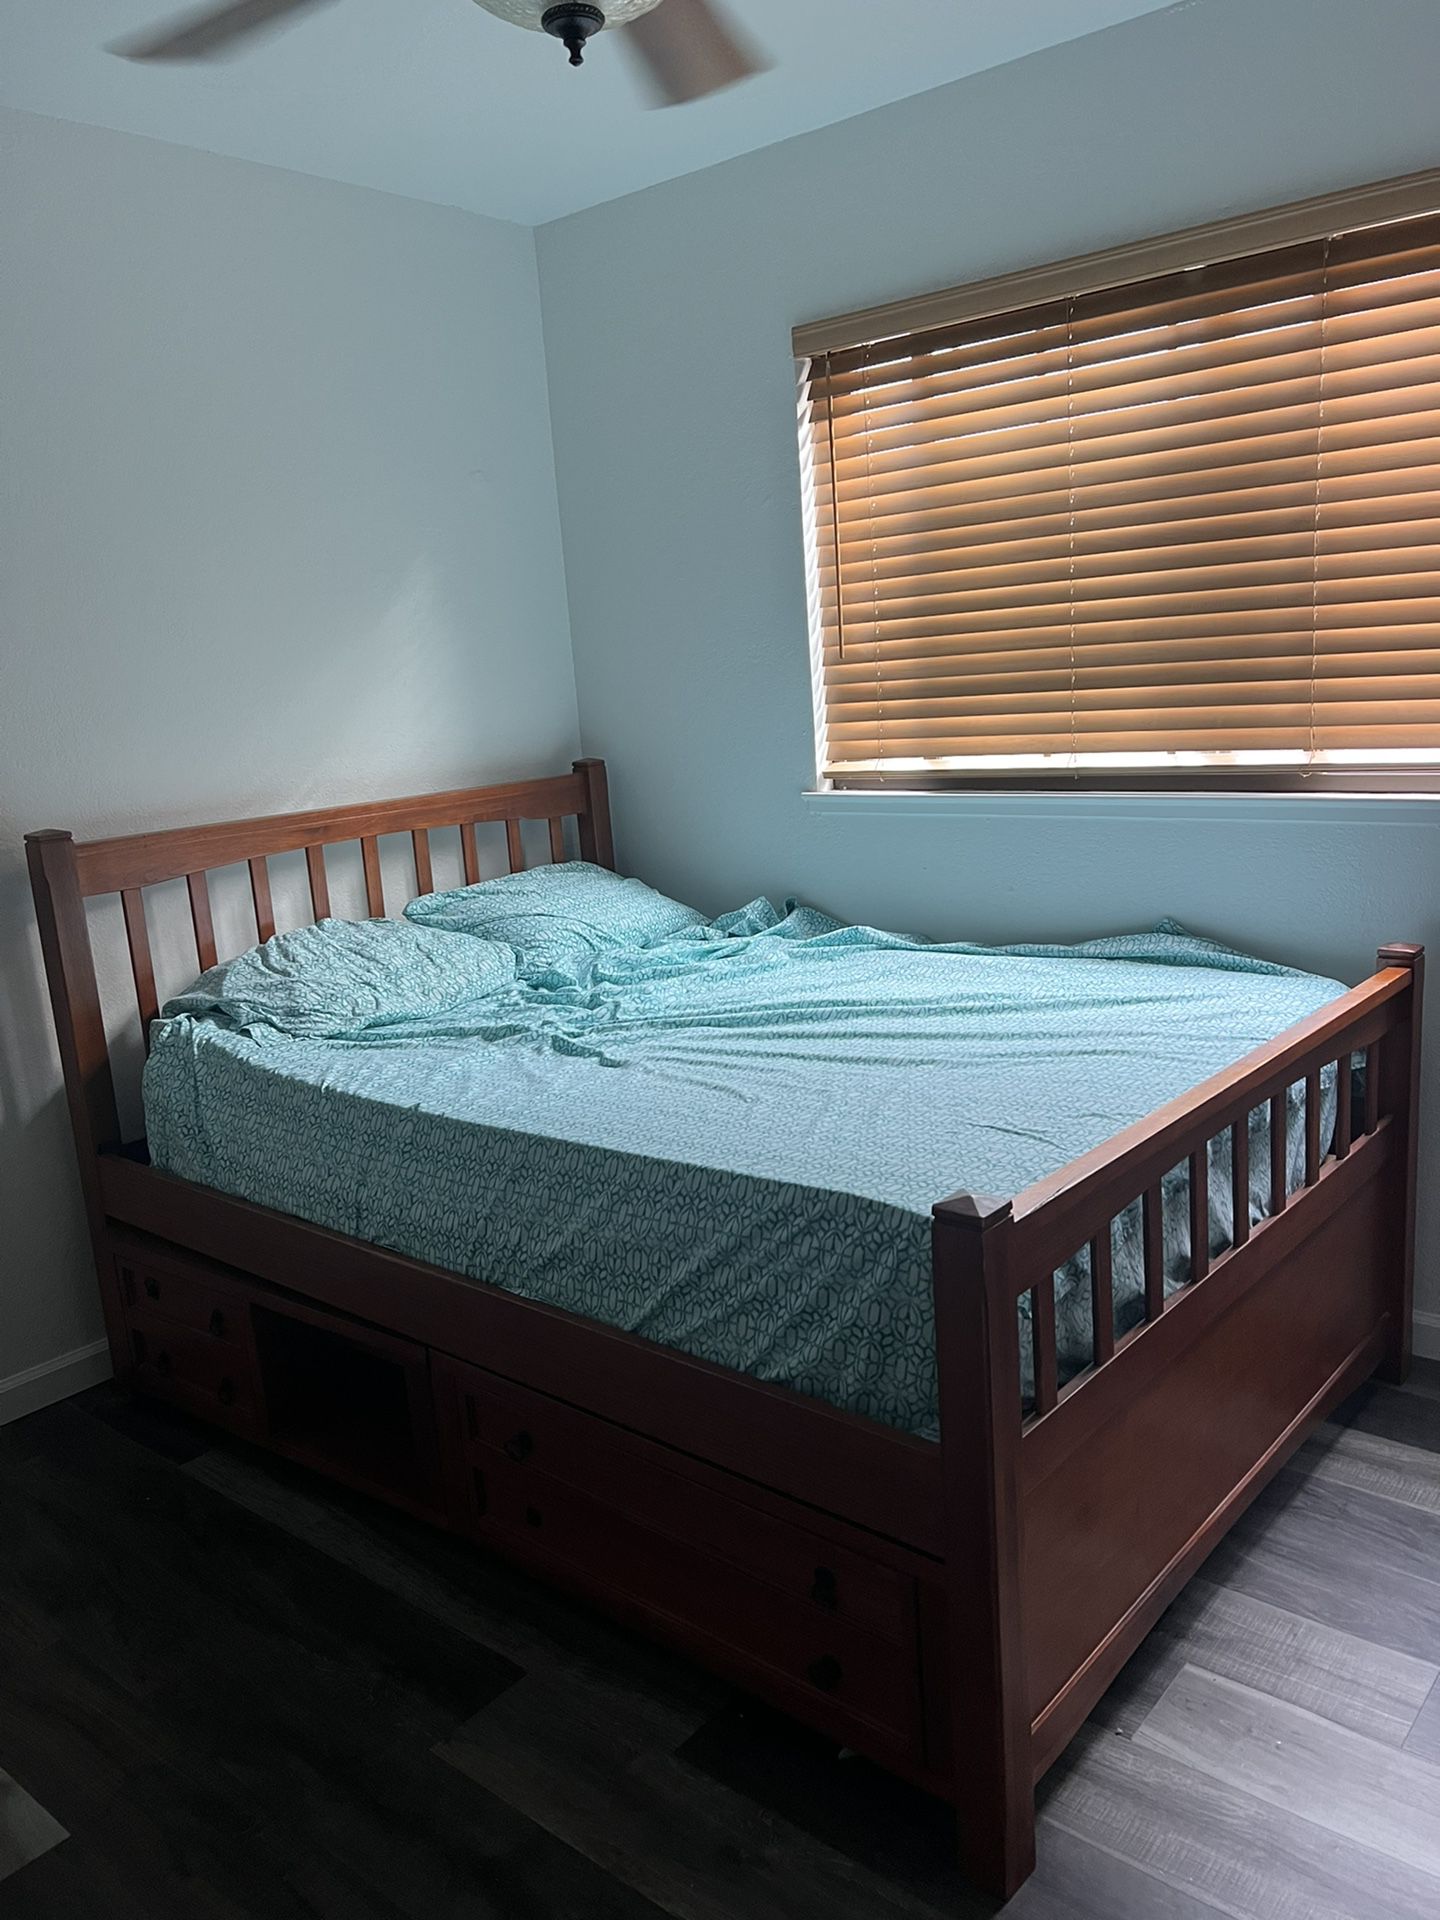 Full size bed with mattress & storage drawers